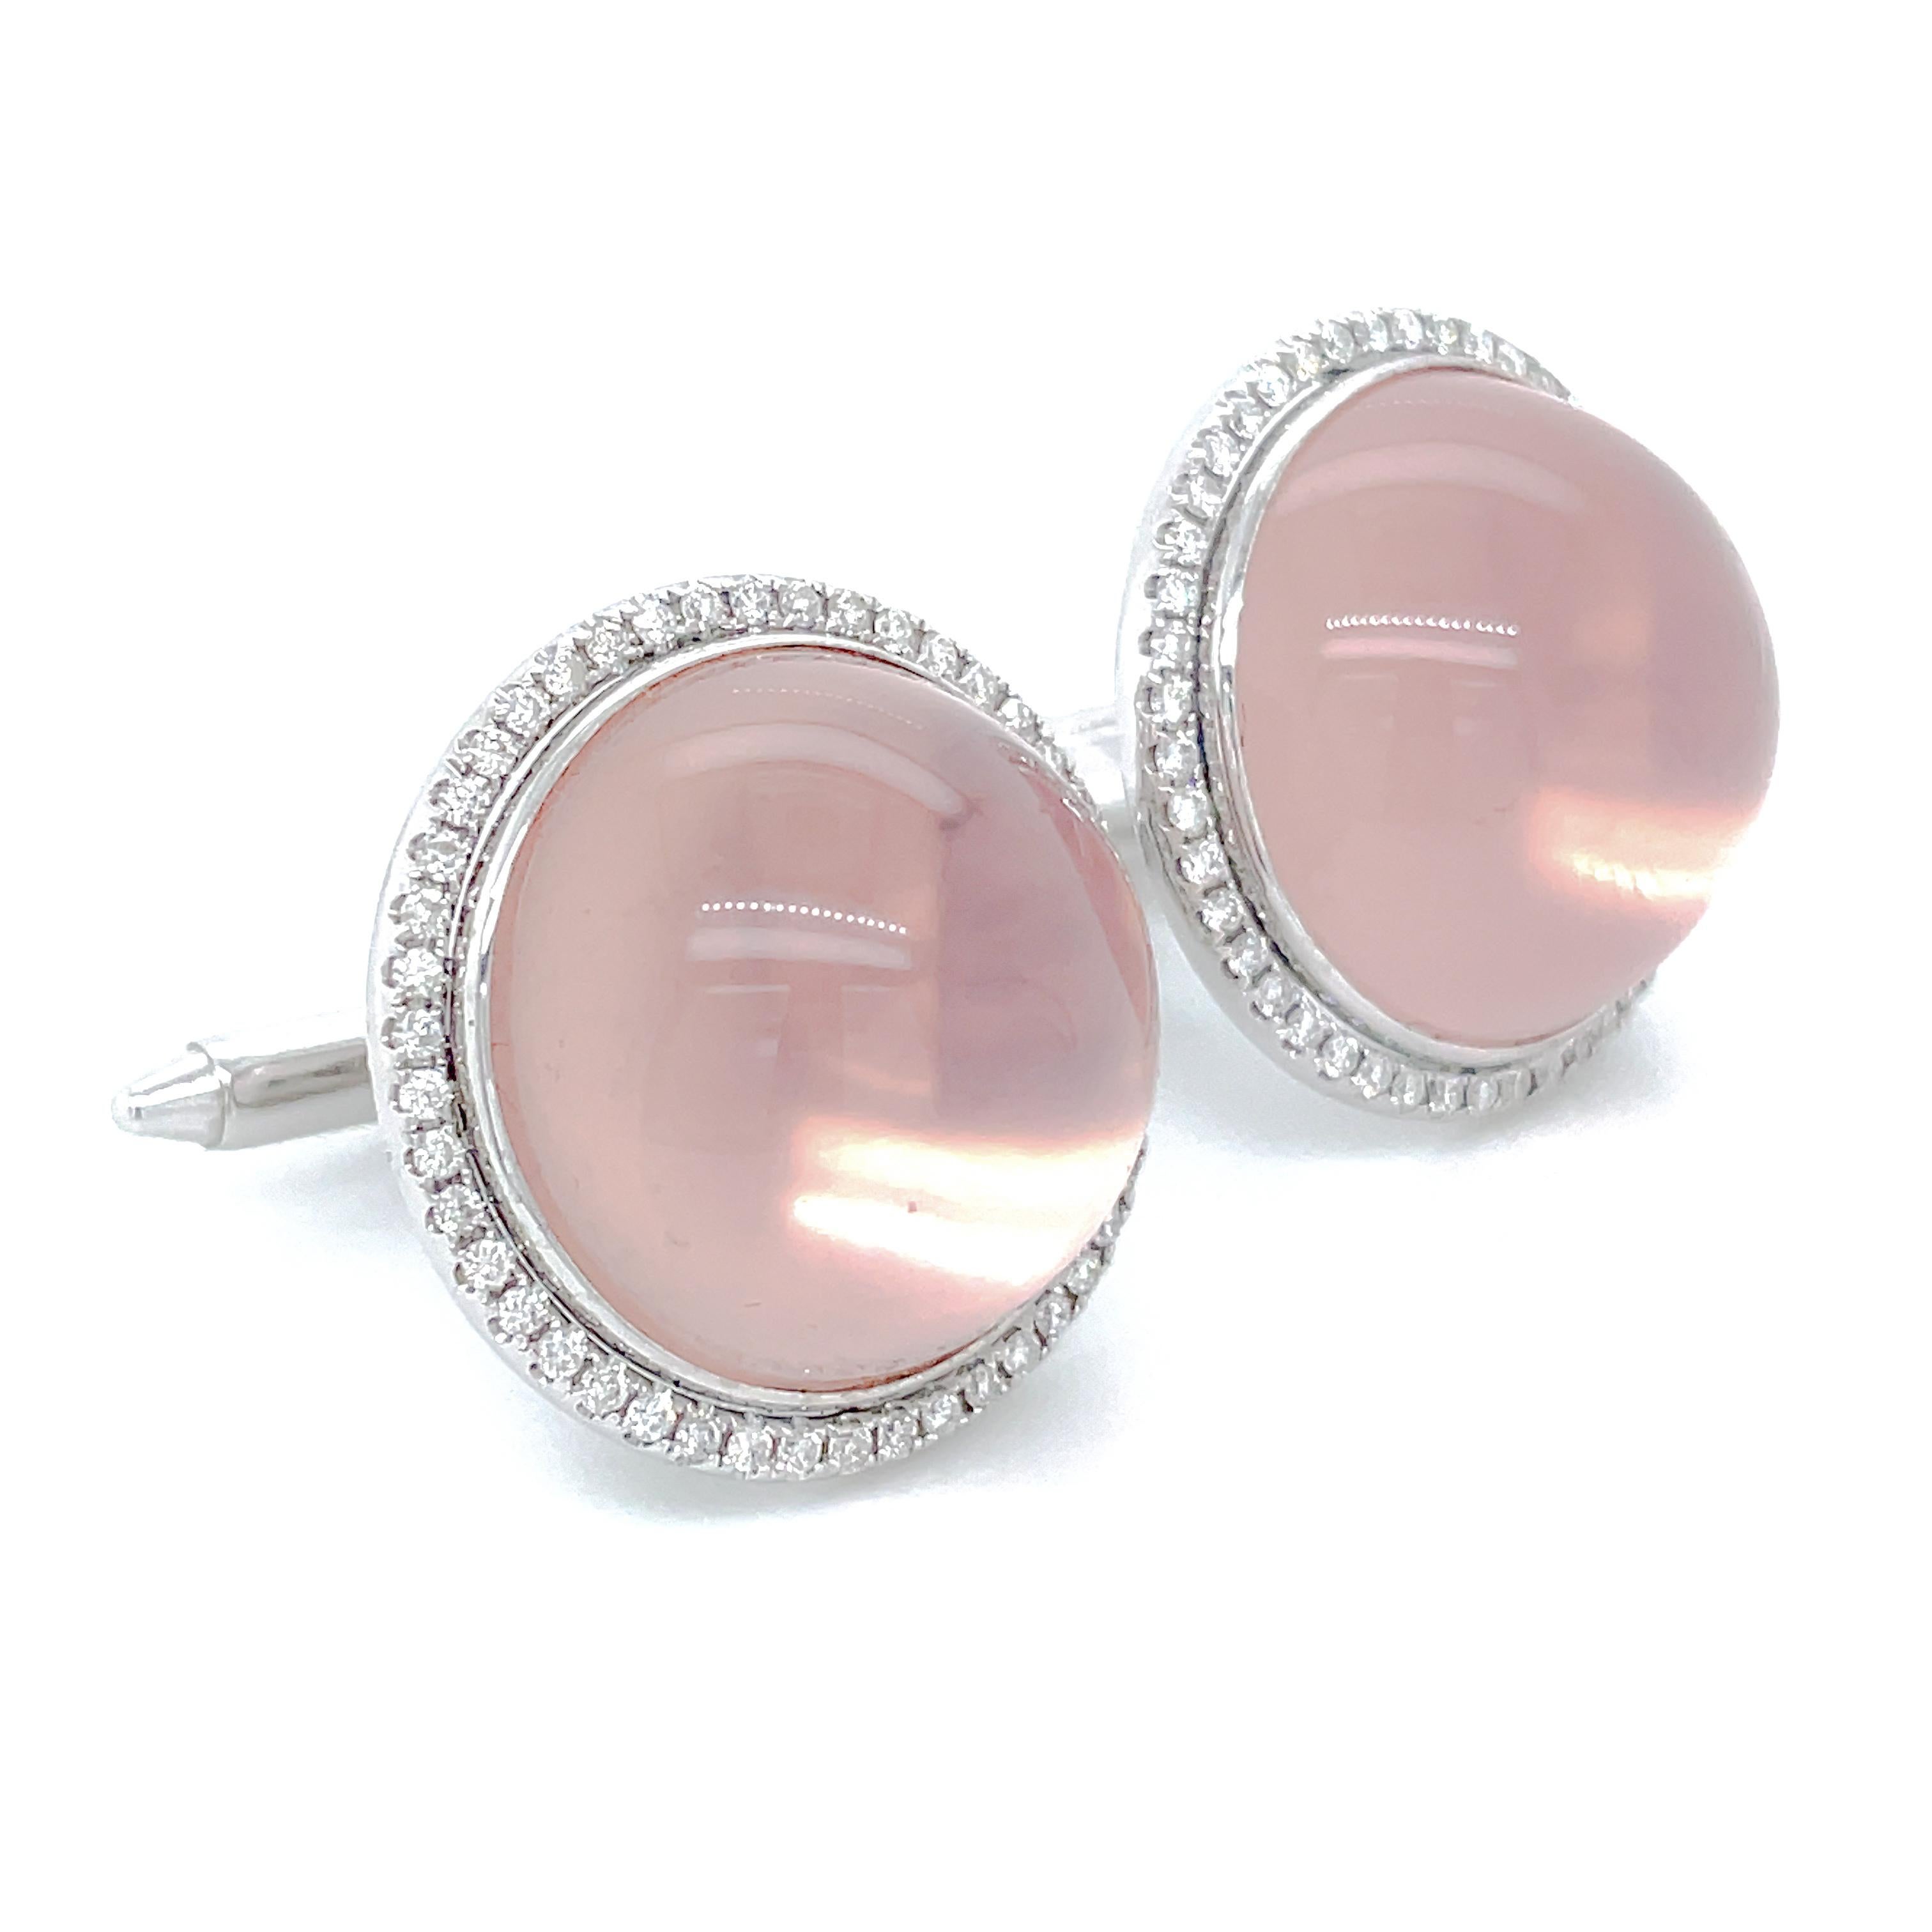 Exquisitely crafted cufflinks feature two stunning star rose quartz cabochons totaling 75.14 carats, each adorned with a mesmerizing asterism effect.

Hold the cufflinks under a bright light source to see the beautiful asterism. 

Watch as the